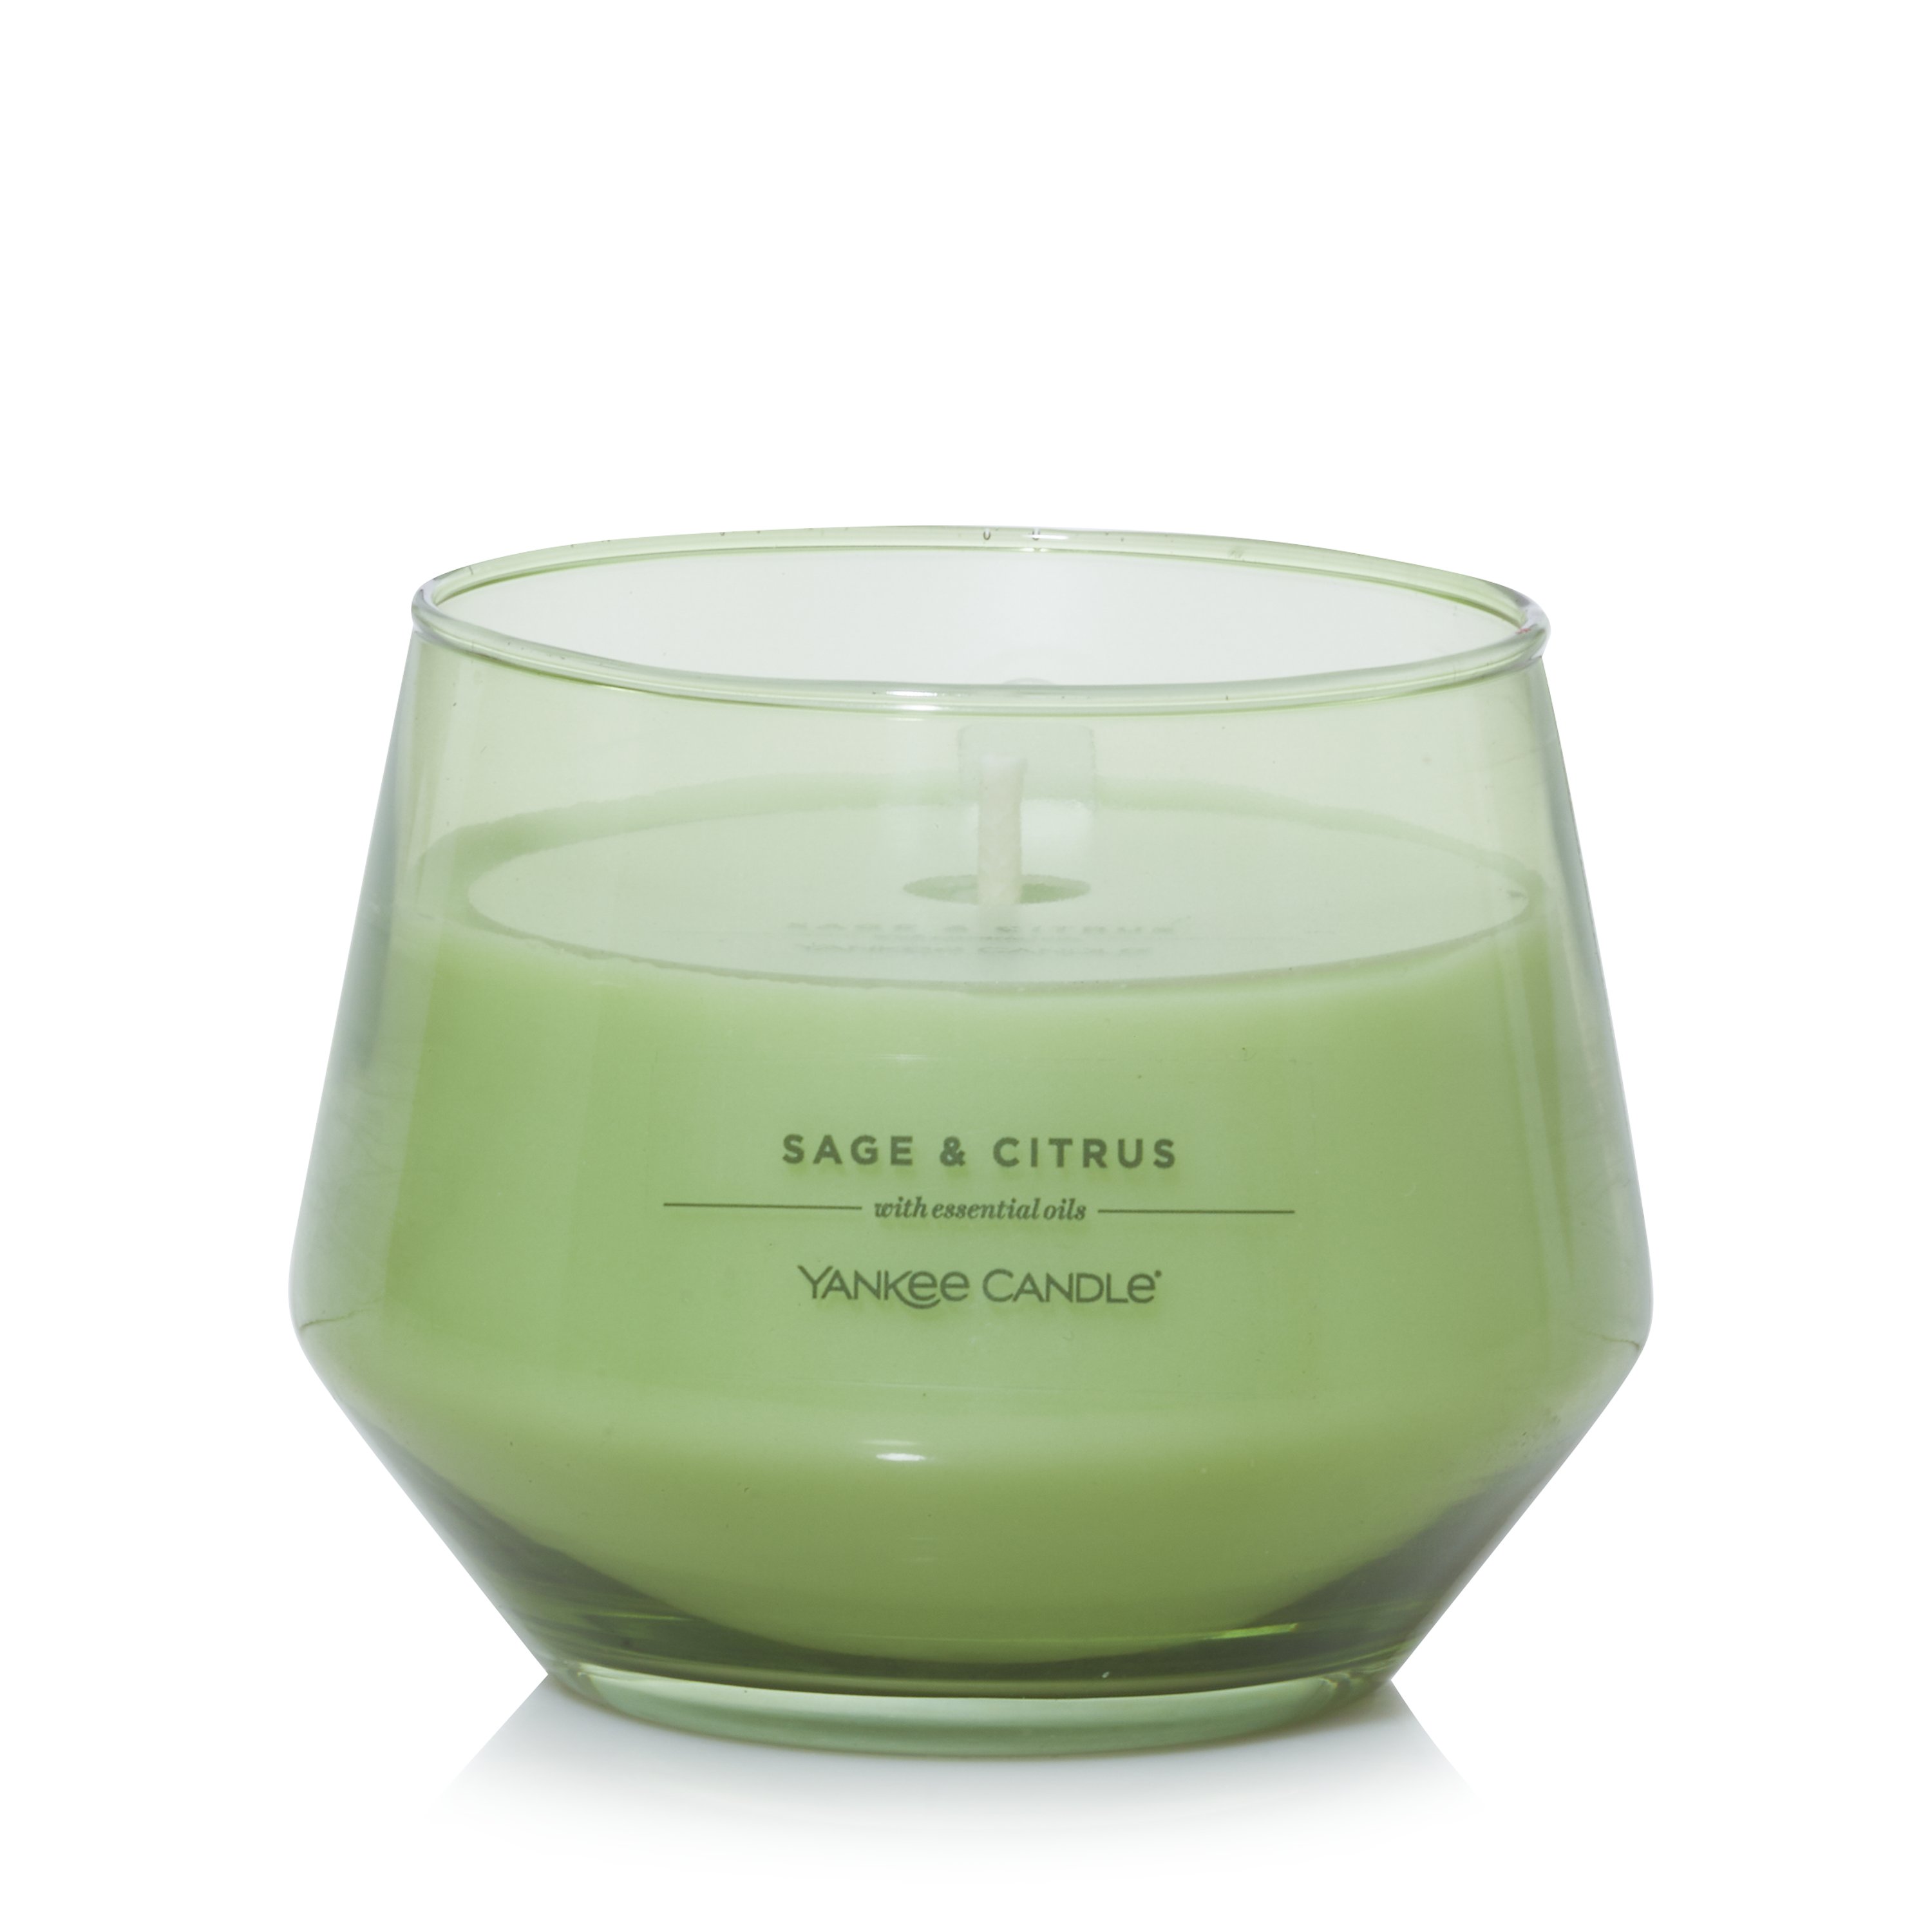  Yankee Candle Citrus with Light Scent-Plug Diffuser